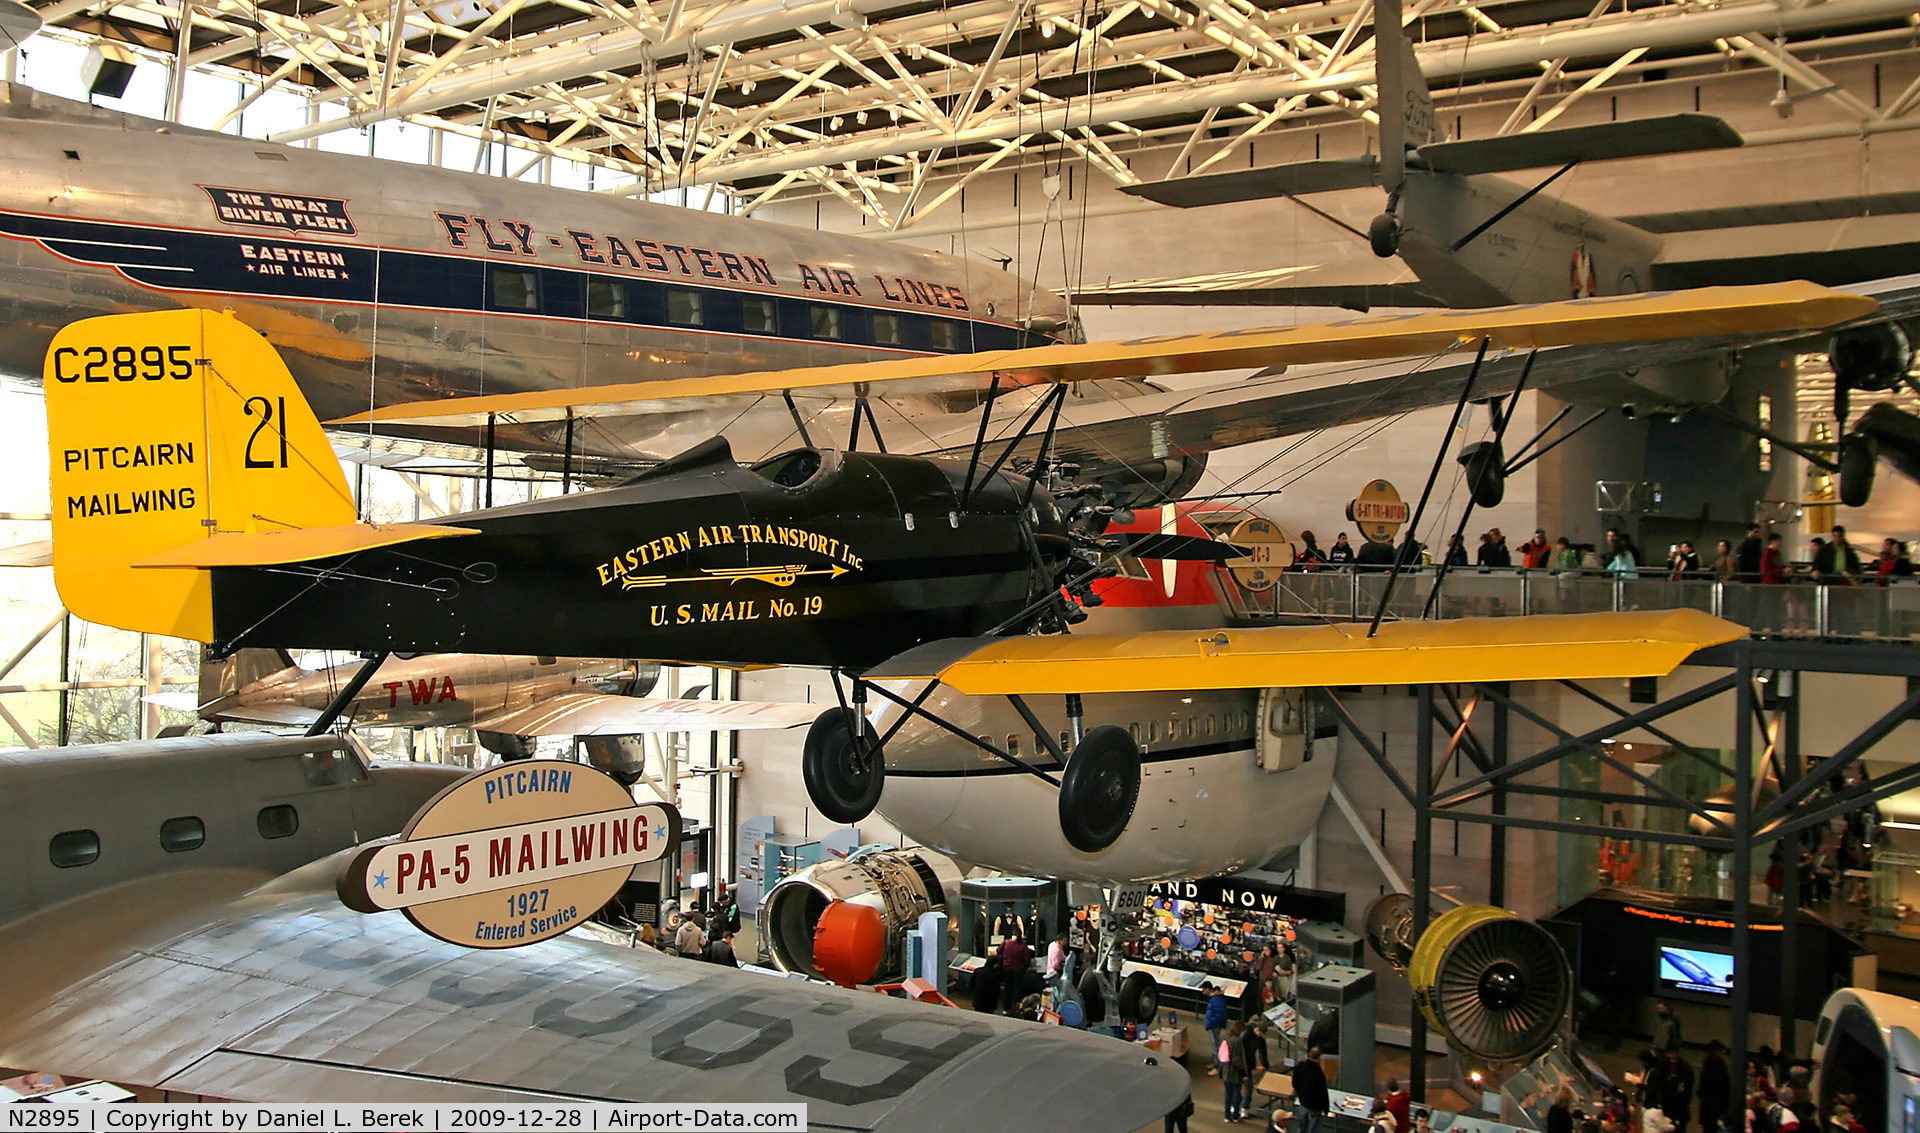 N2895, 1927 Pitcairn PA-5 Mailwing C/N 1, The NASM Mailwing is still in the main hall but now occupies a more prominent position.